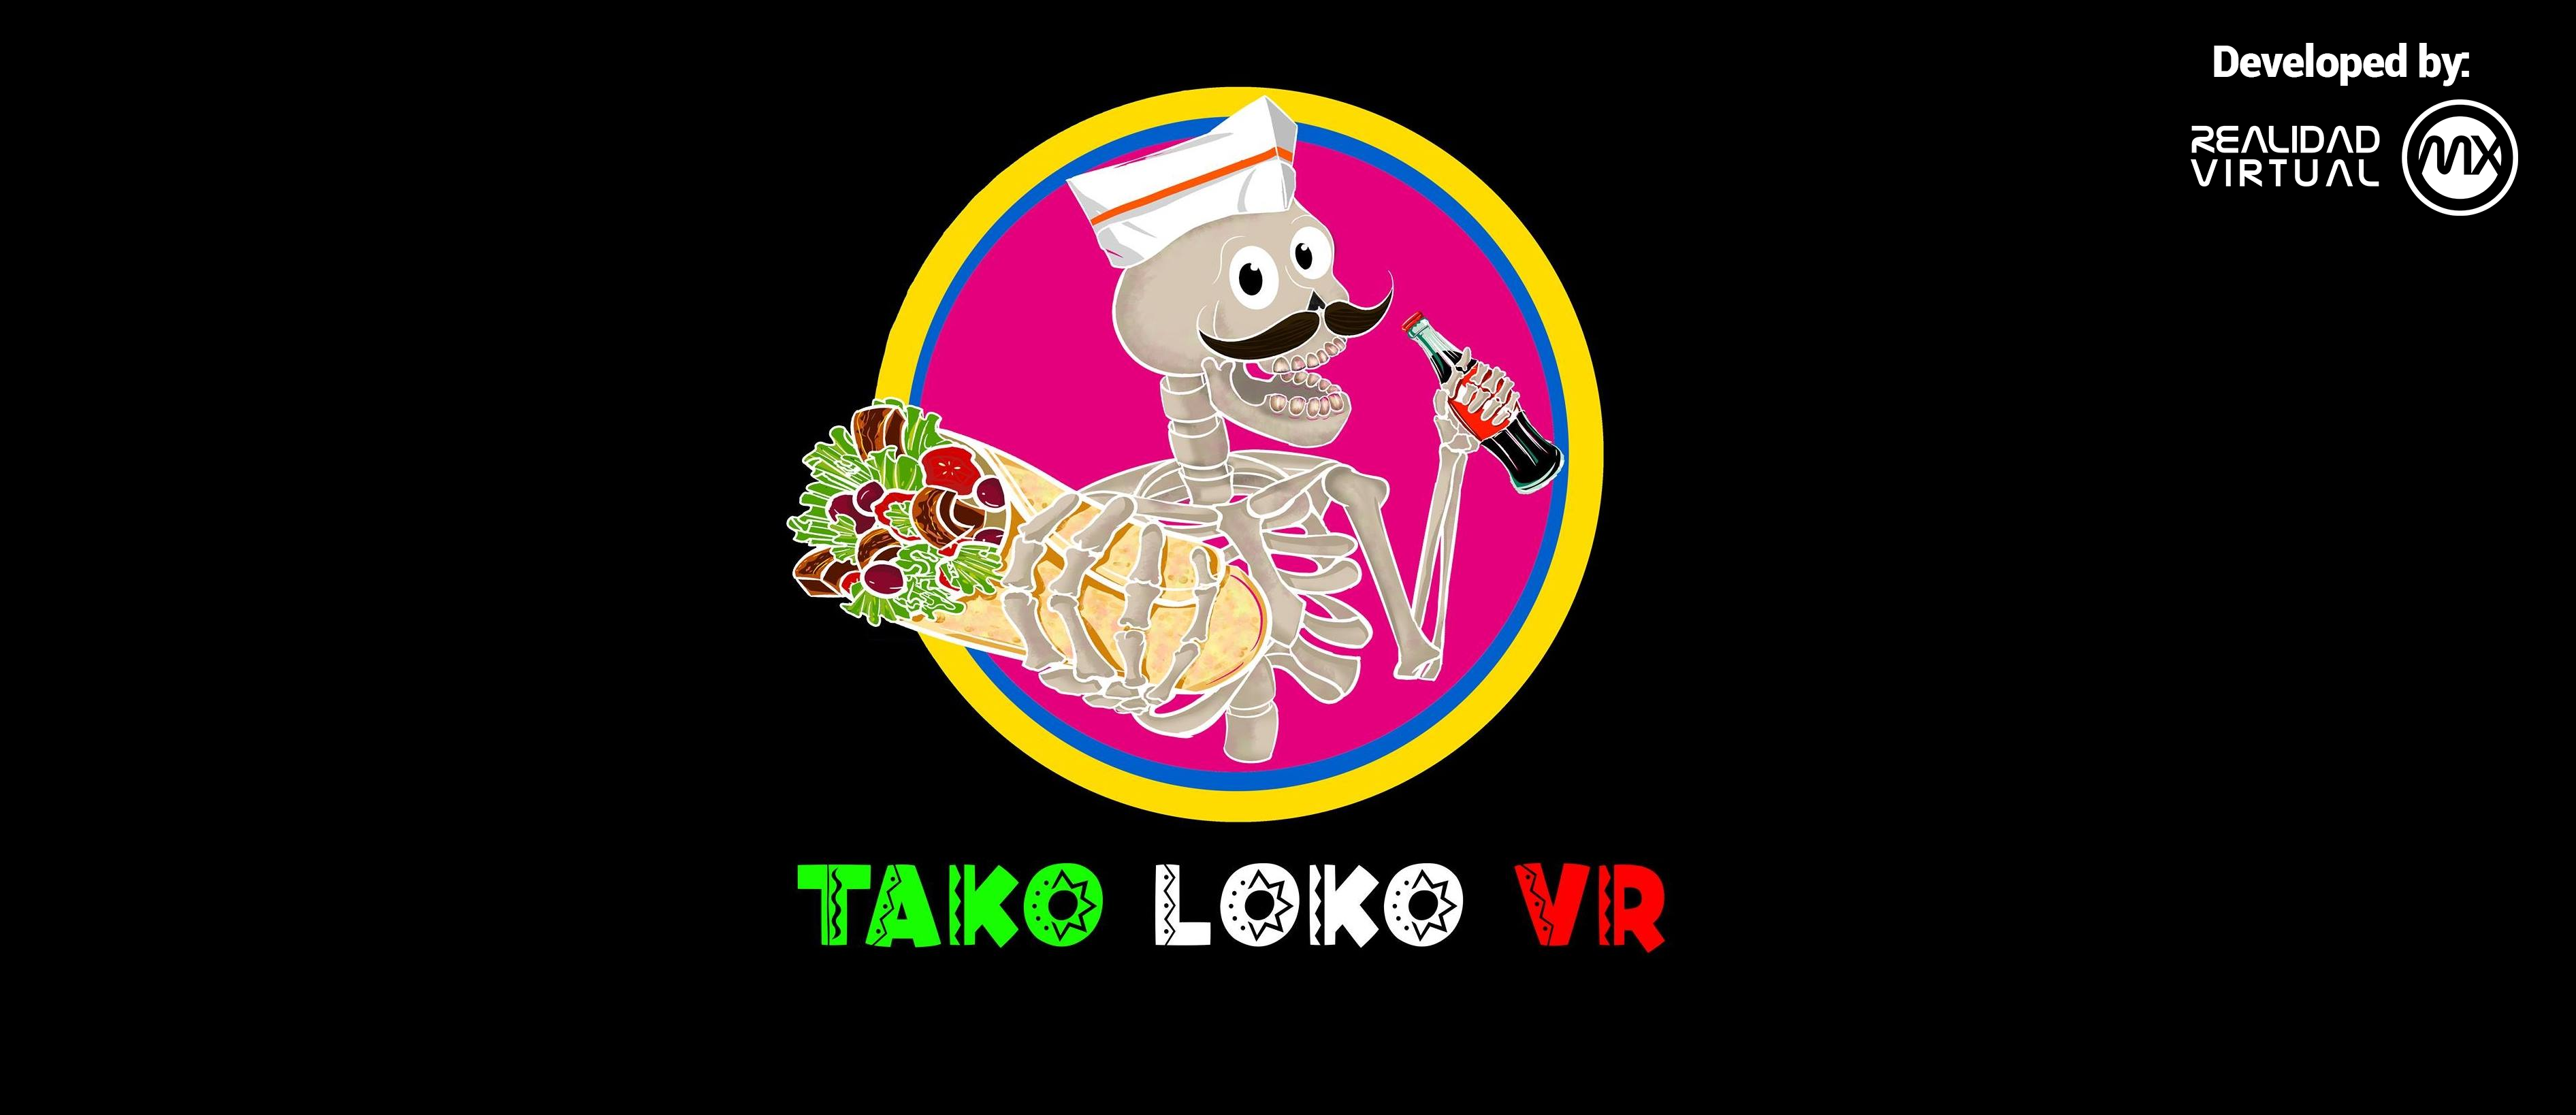 Tako Loko VR A1.0 for Quest/PC VR